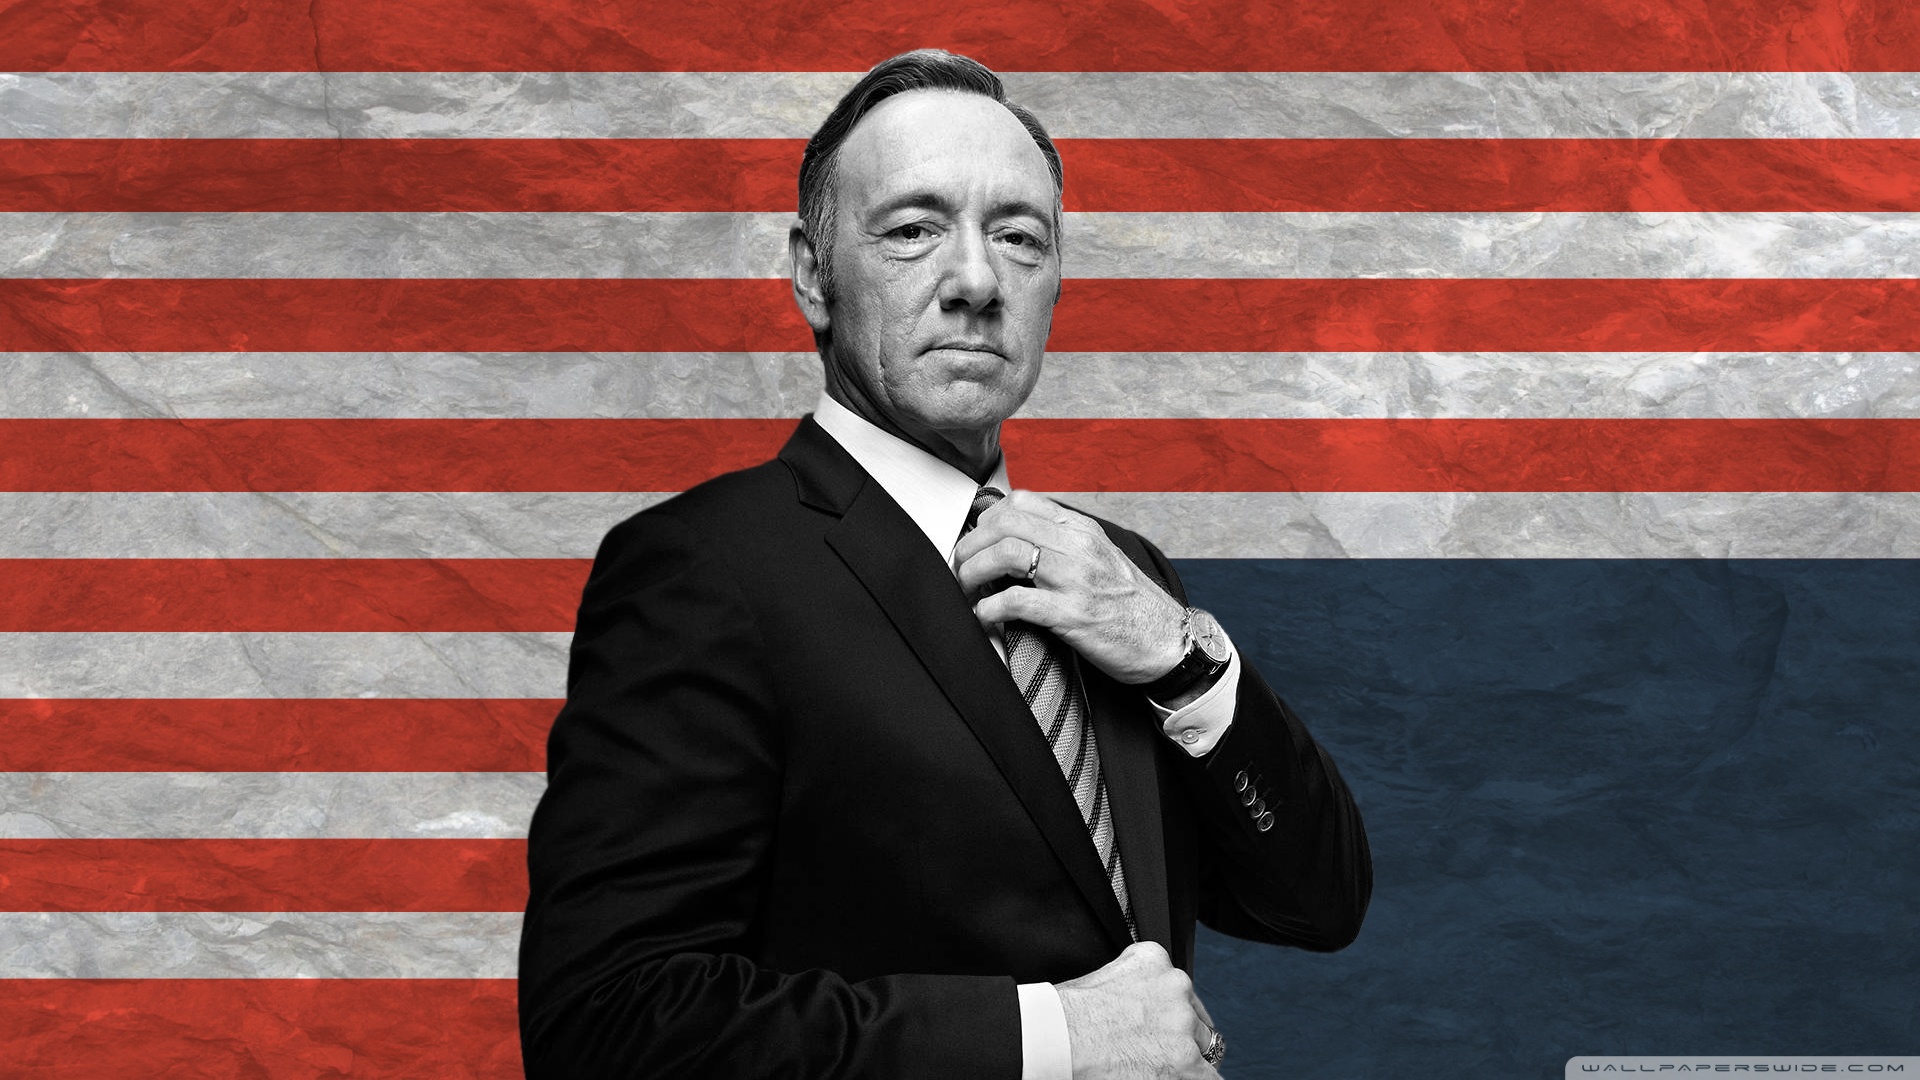 House of cards wallpapers